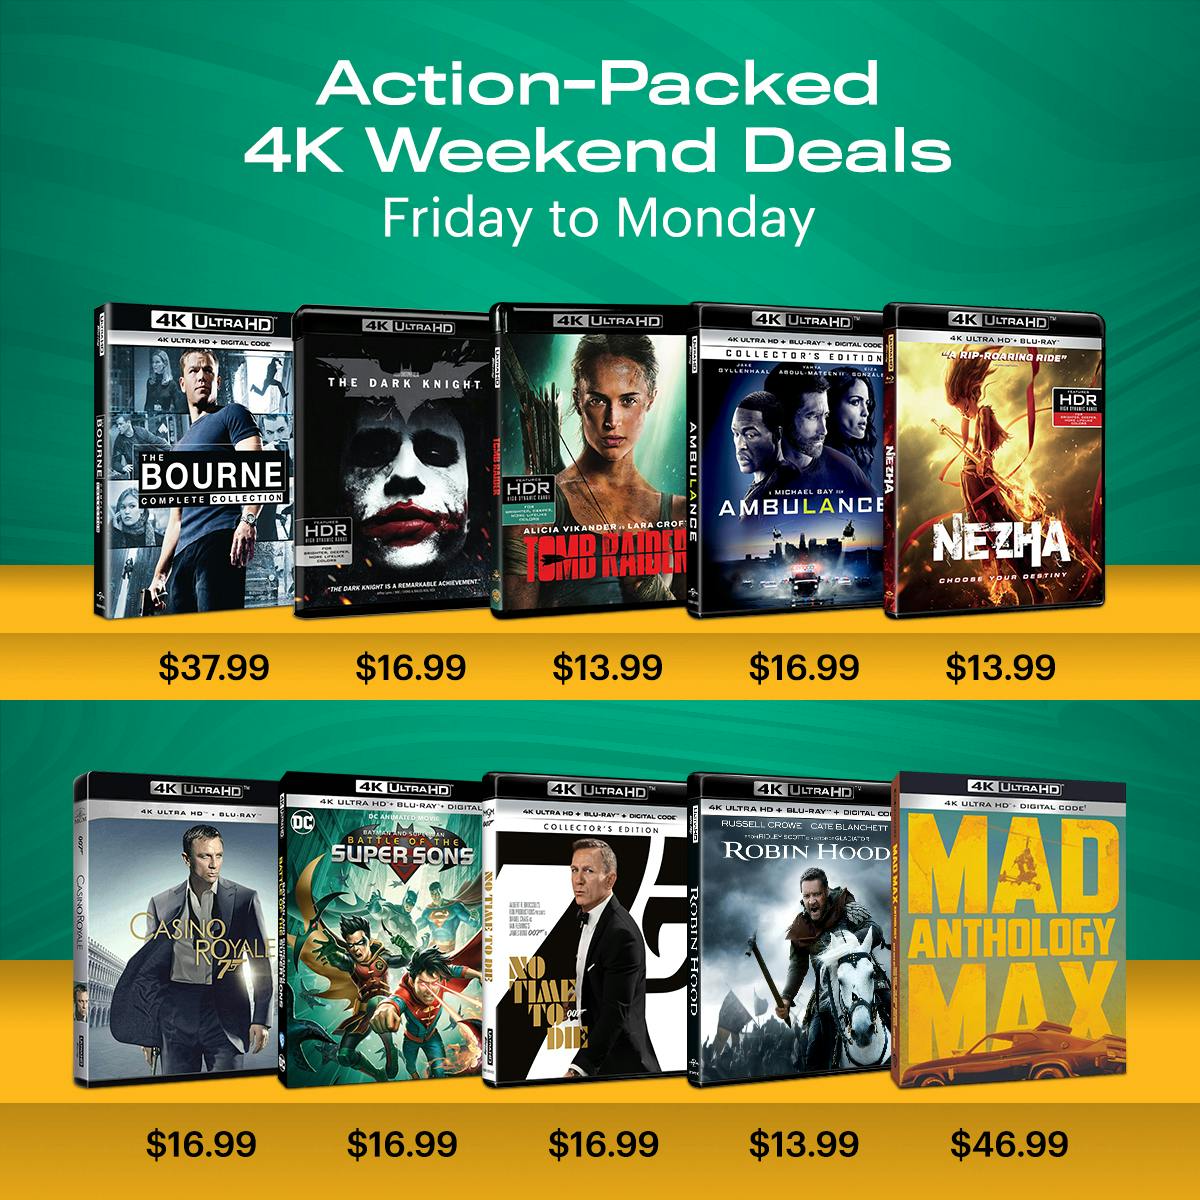 1200x1200 Weekend 4K Deals - Action-Packed